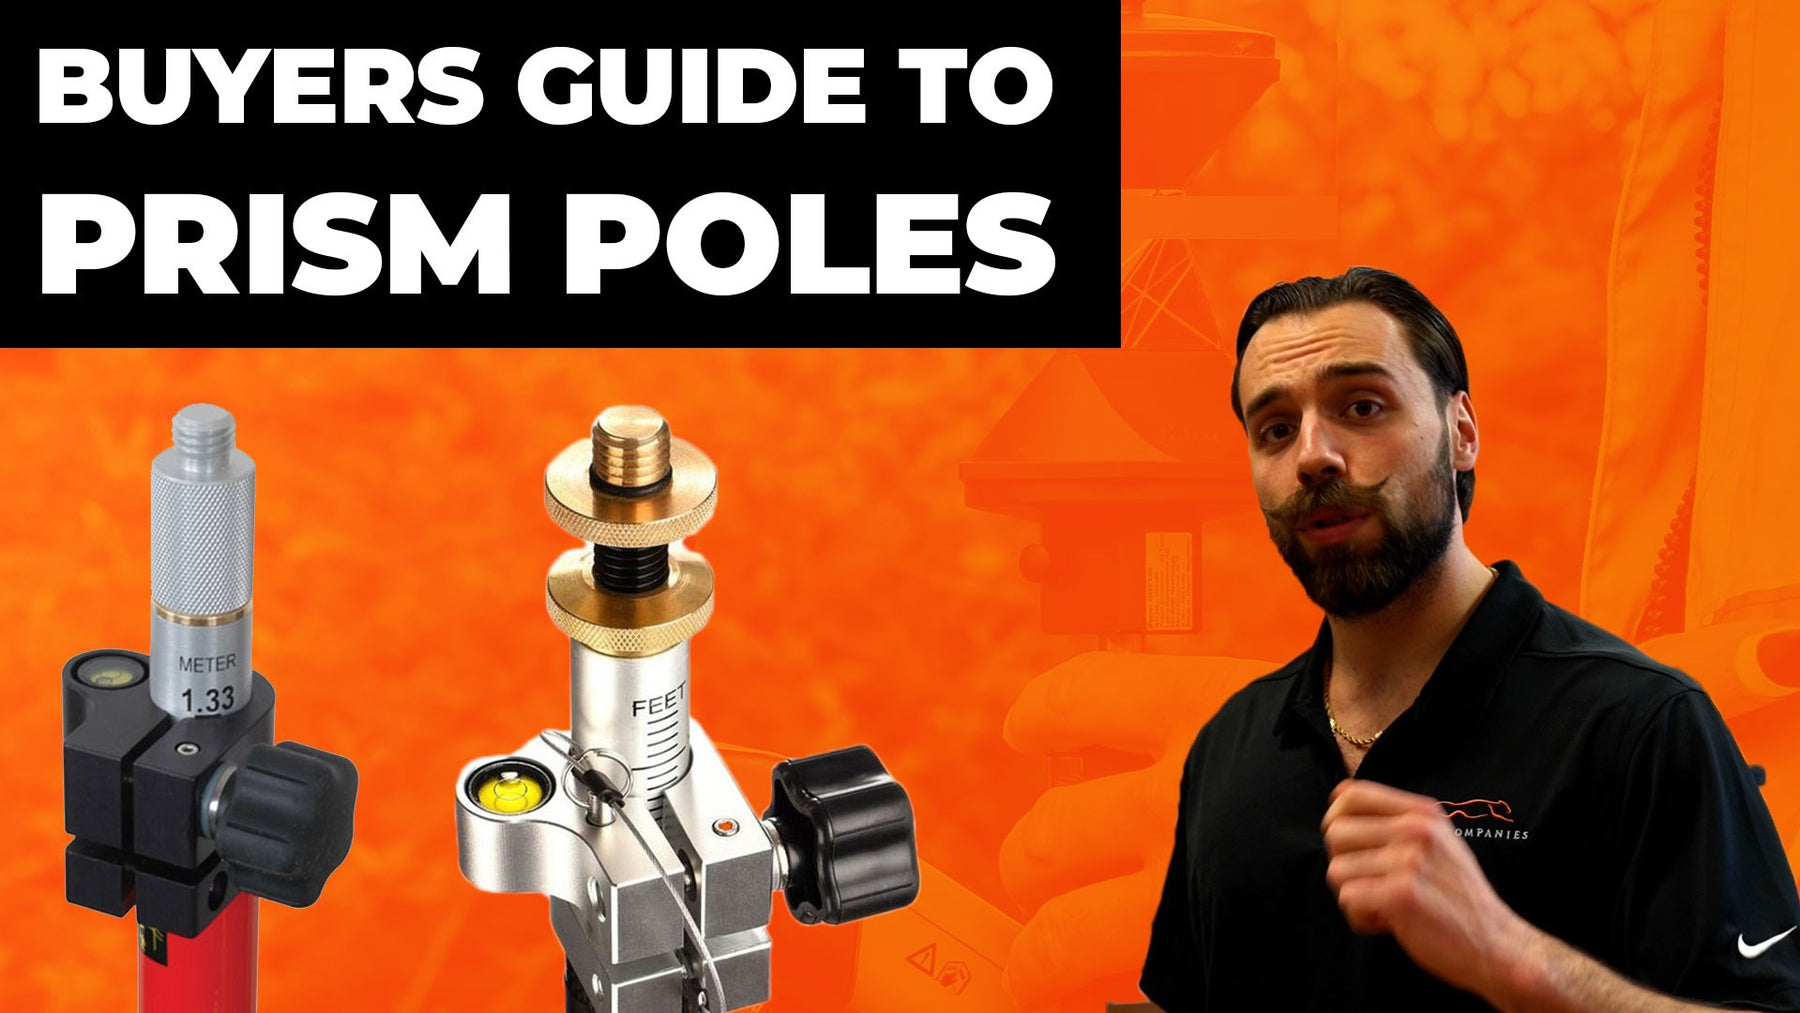 Prism Poles - What you need to know